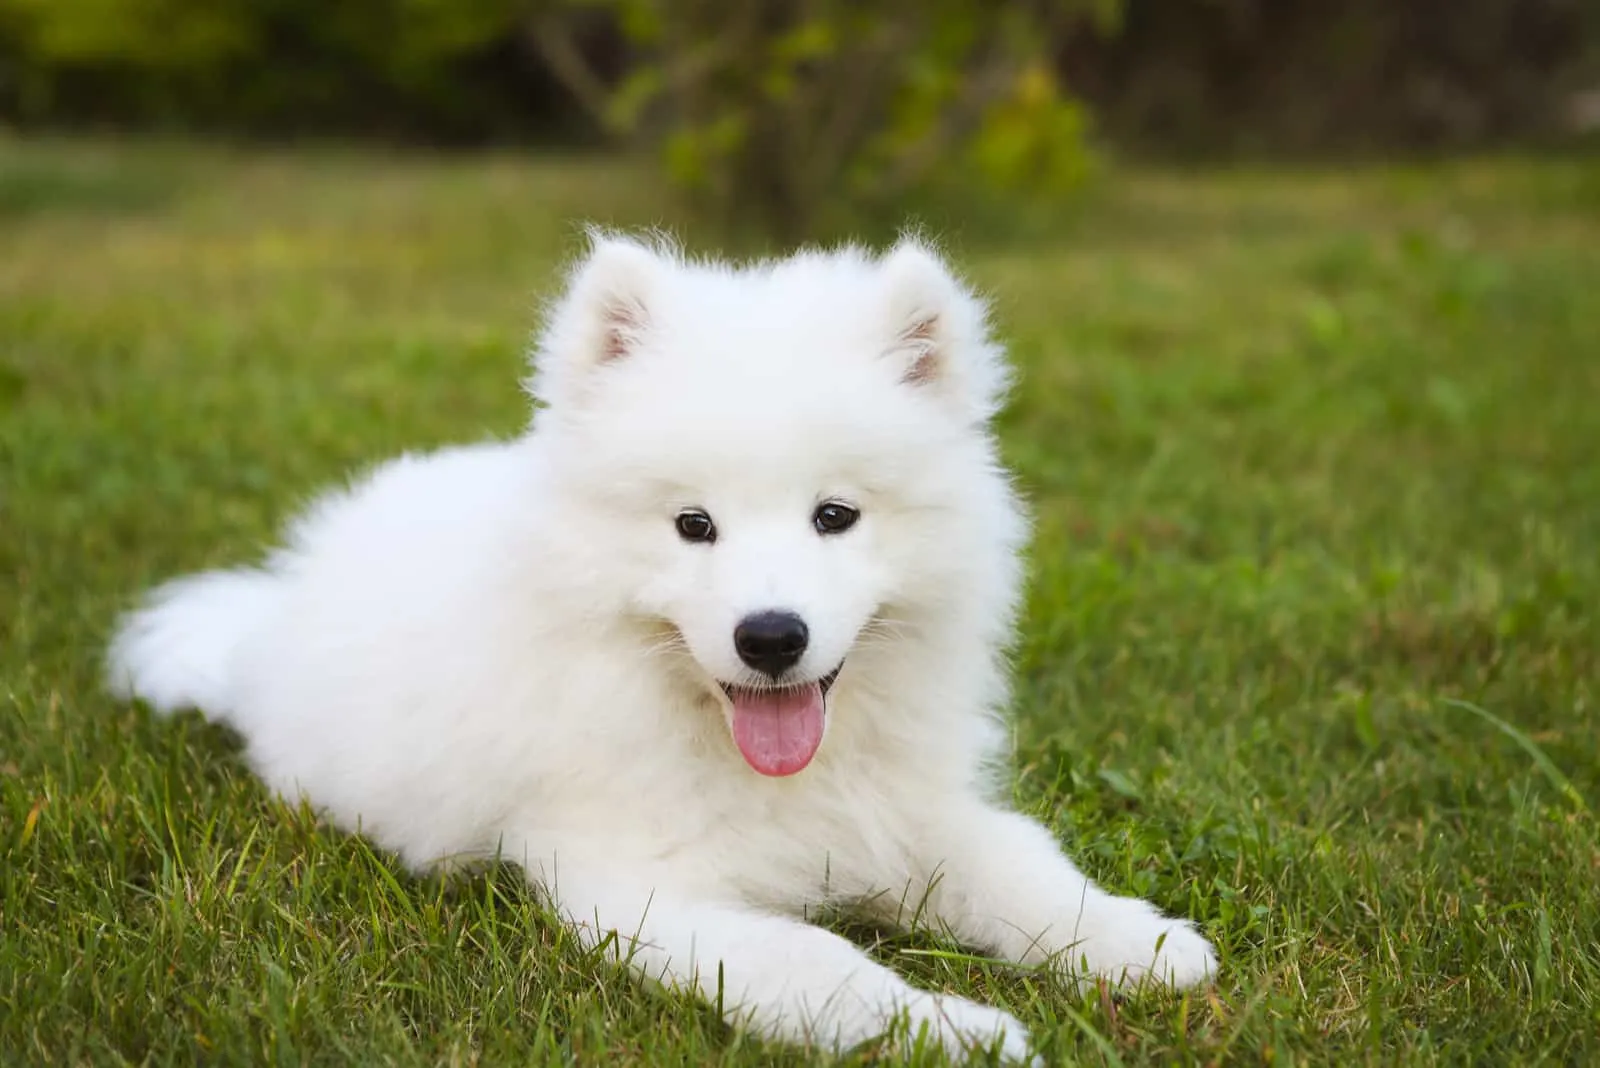 Funny Samoyed puppy in the summer garden on the green grass